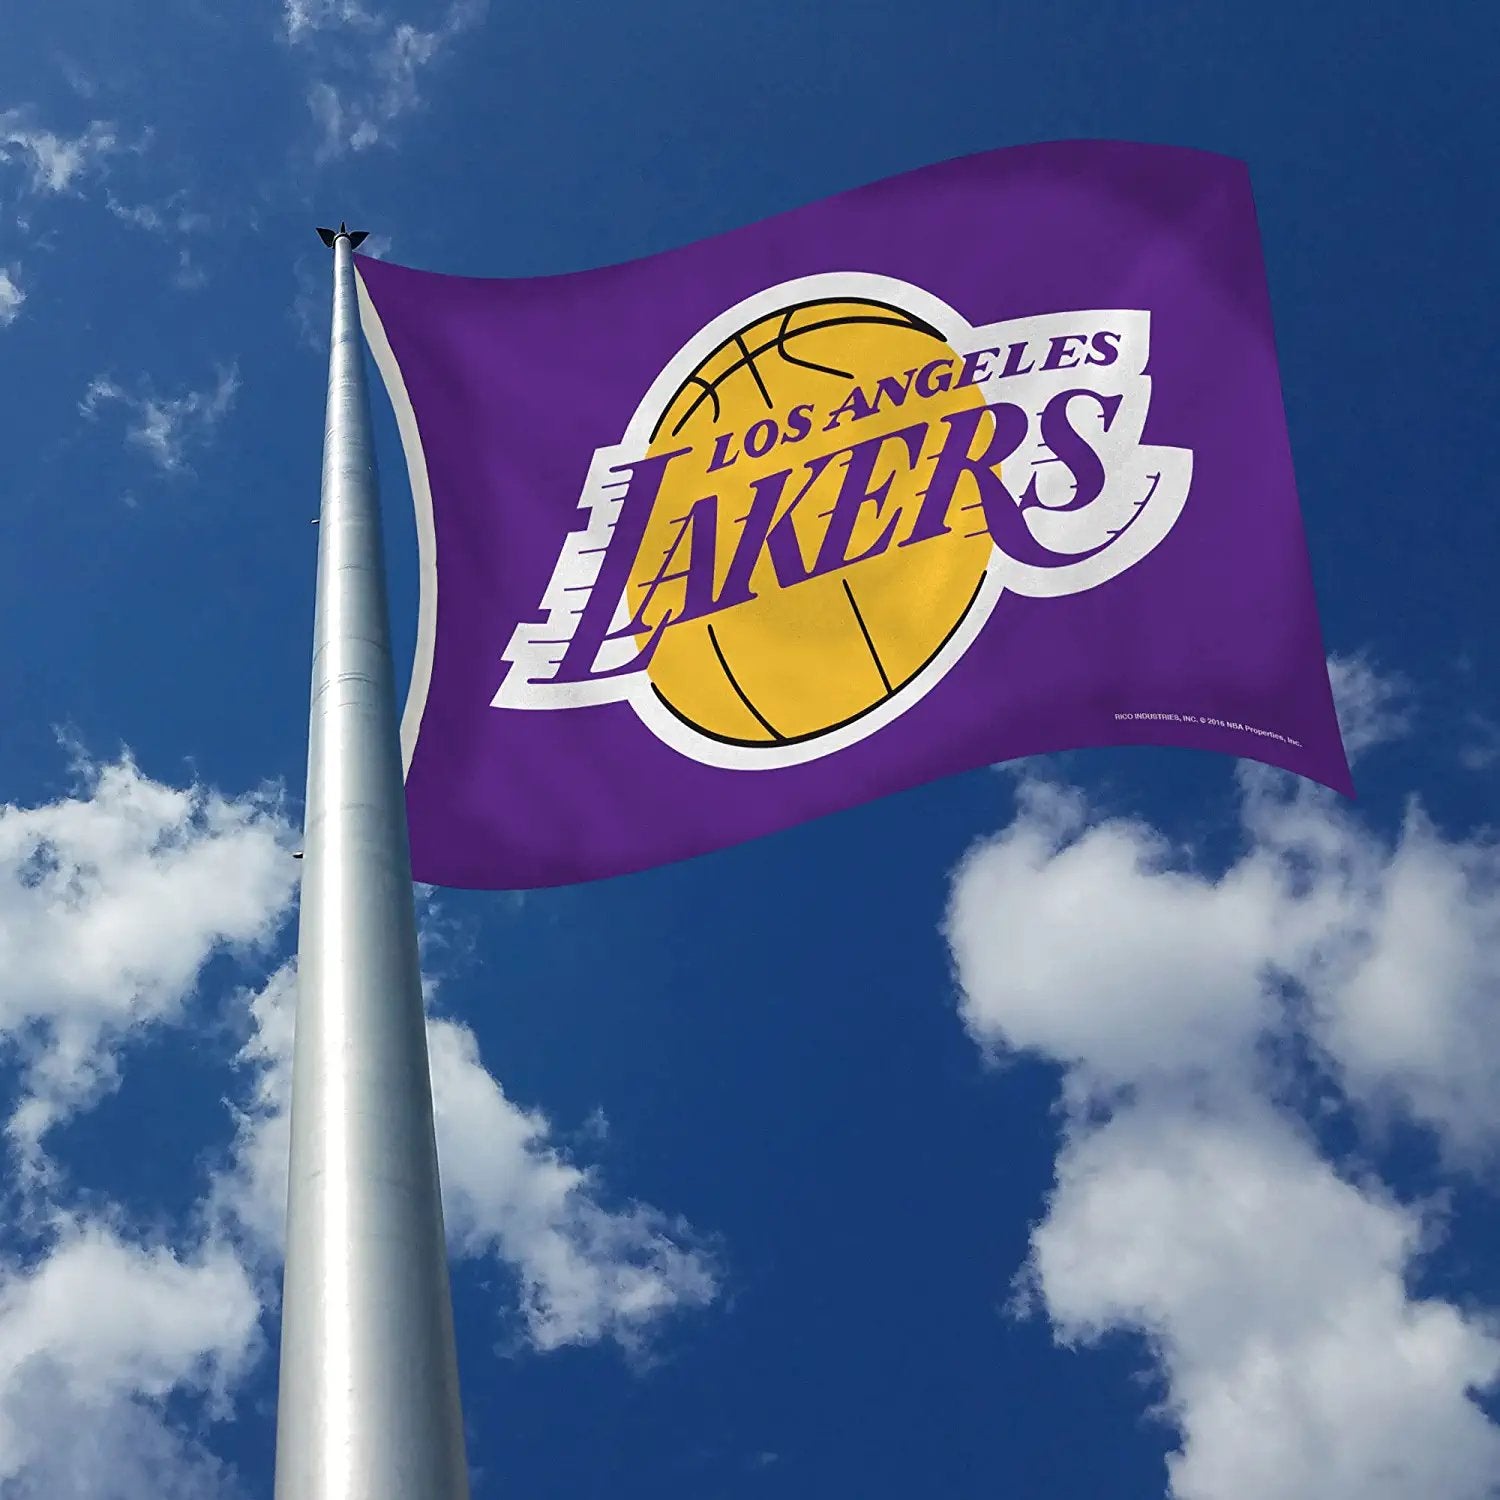 Los Angeles Lakers Premium 3x5 Feet Flag Banner, Purple Design, Metal Grommets, Outdoor Use, Single Sided